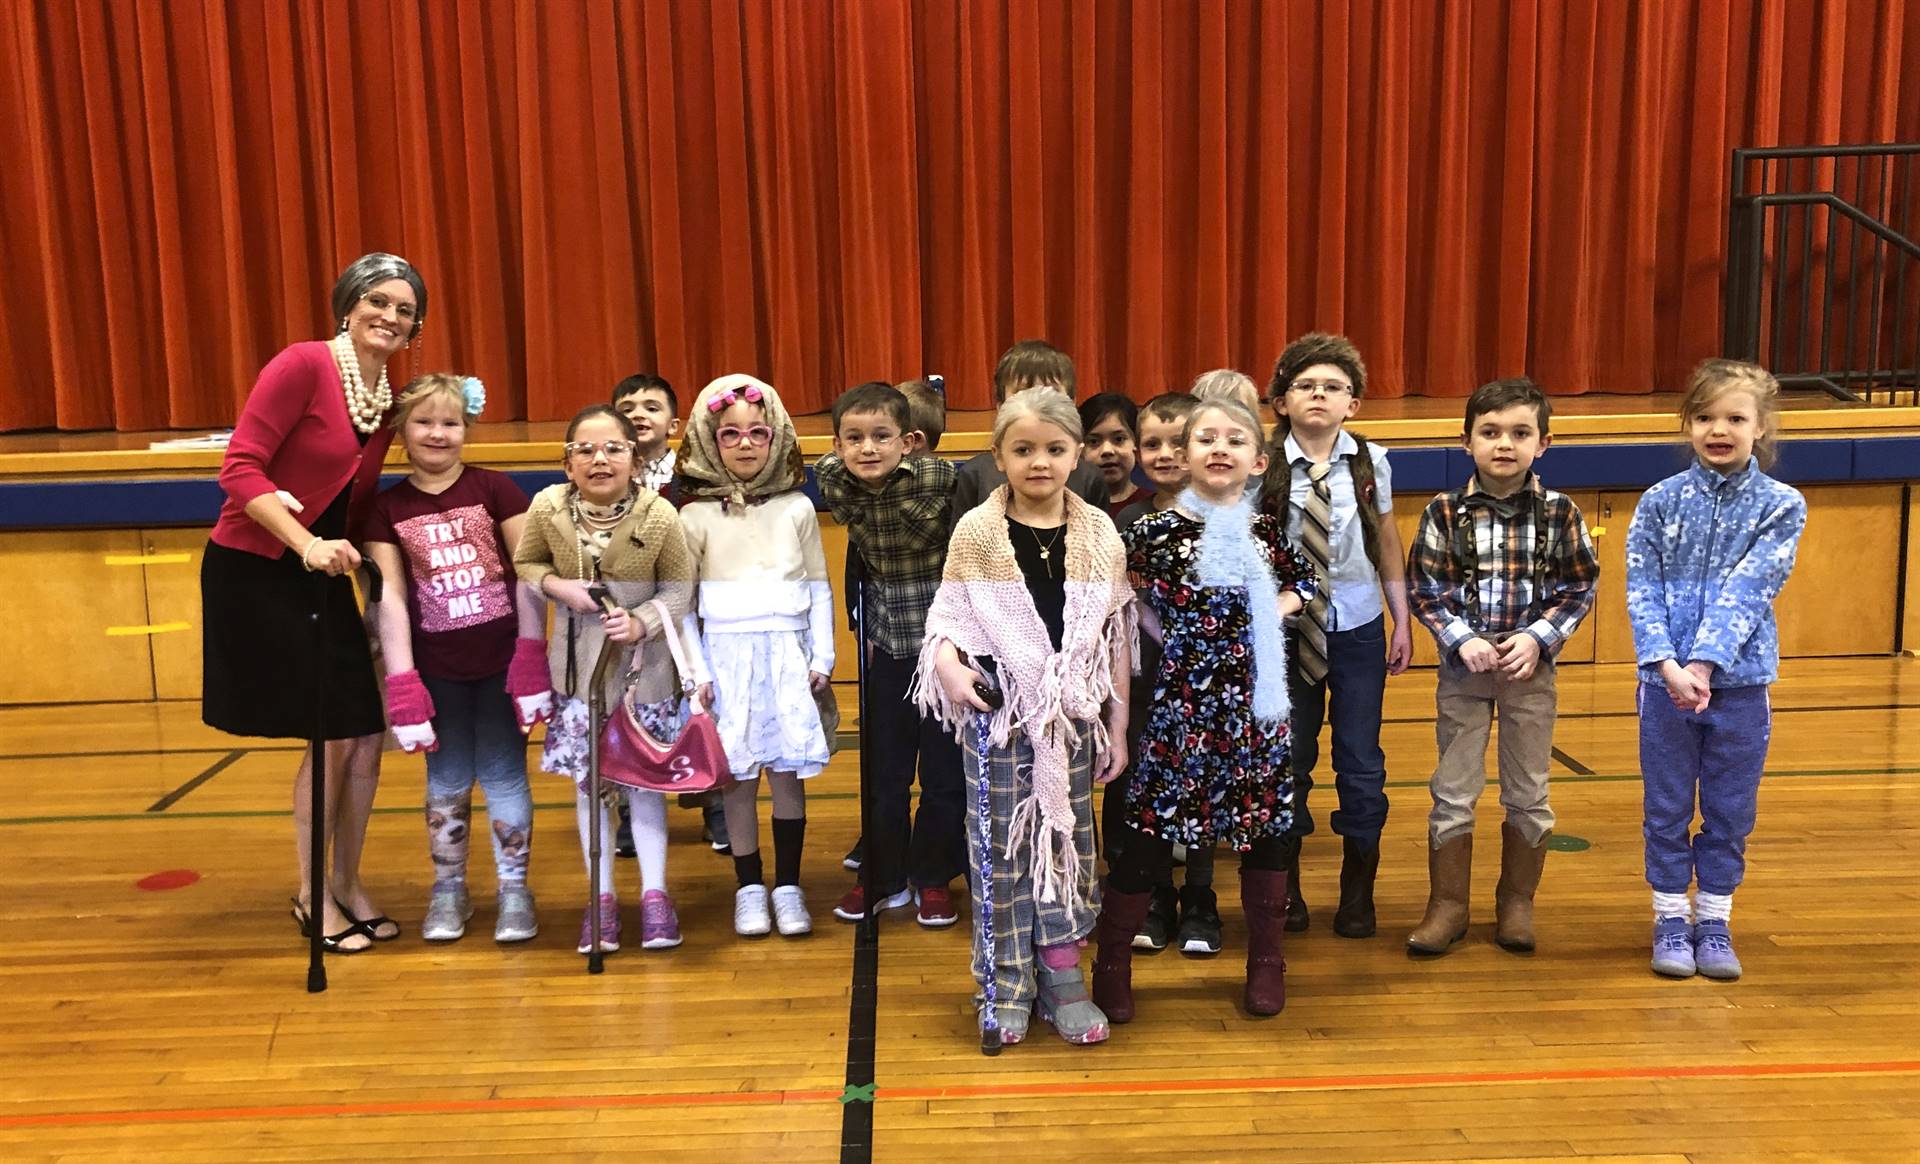 A teacher and her class on 100th day of school.